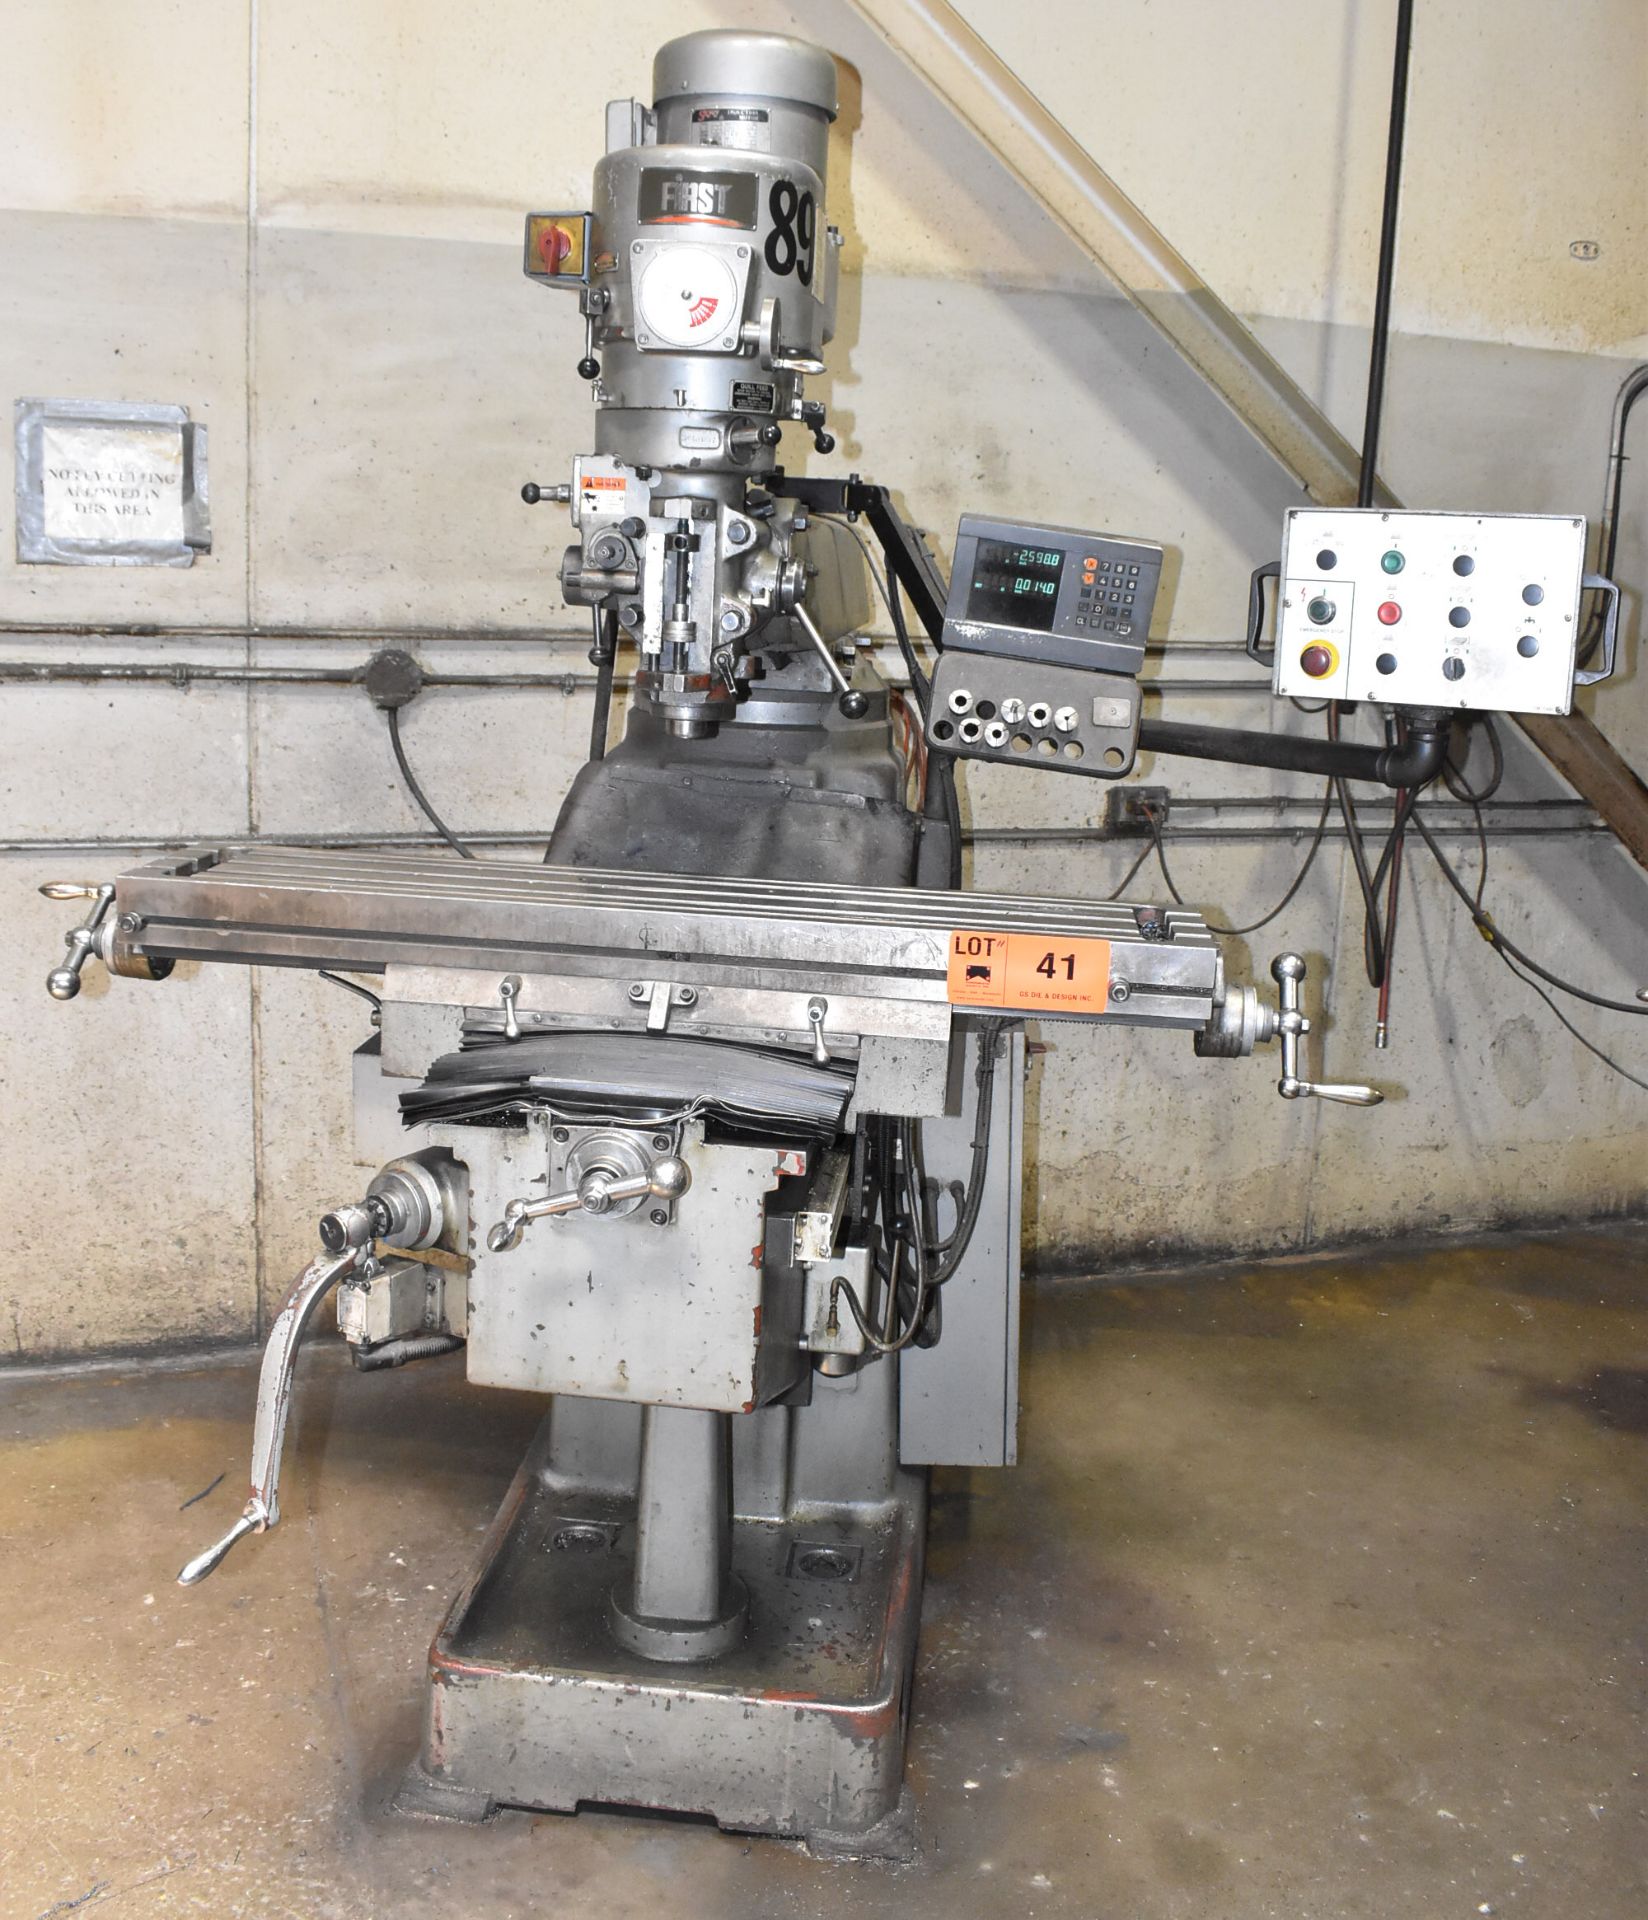 FIRST LC-185VS-B VERTICAL MILLING MACHINE WITH 50"X10" TABLE, SPEEDS TO 4500 RPM, HEIDENHAIN 2-